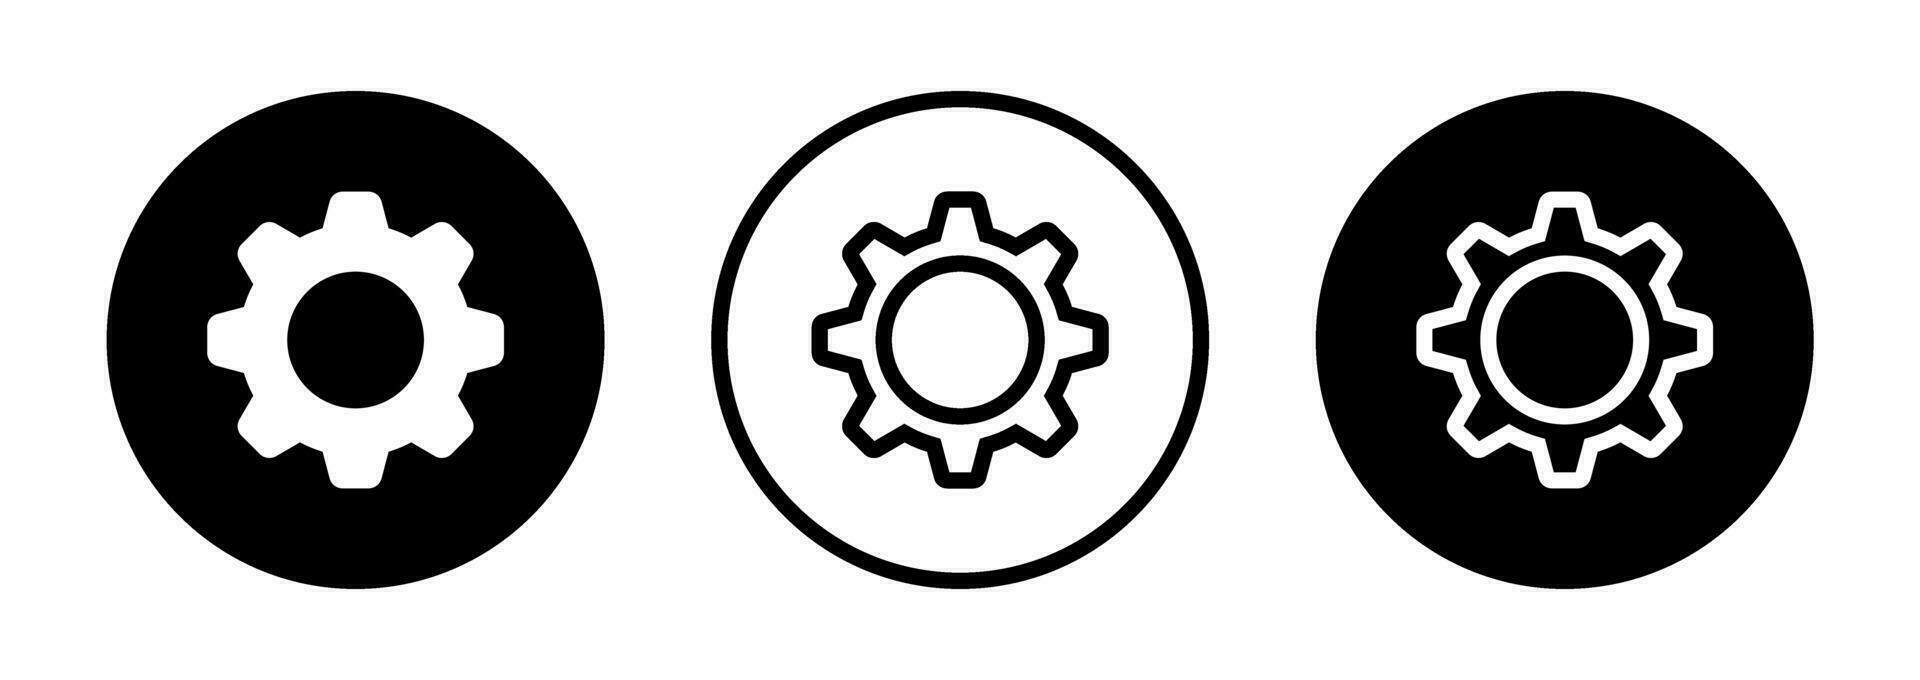 simple icon of settings button vector